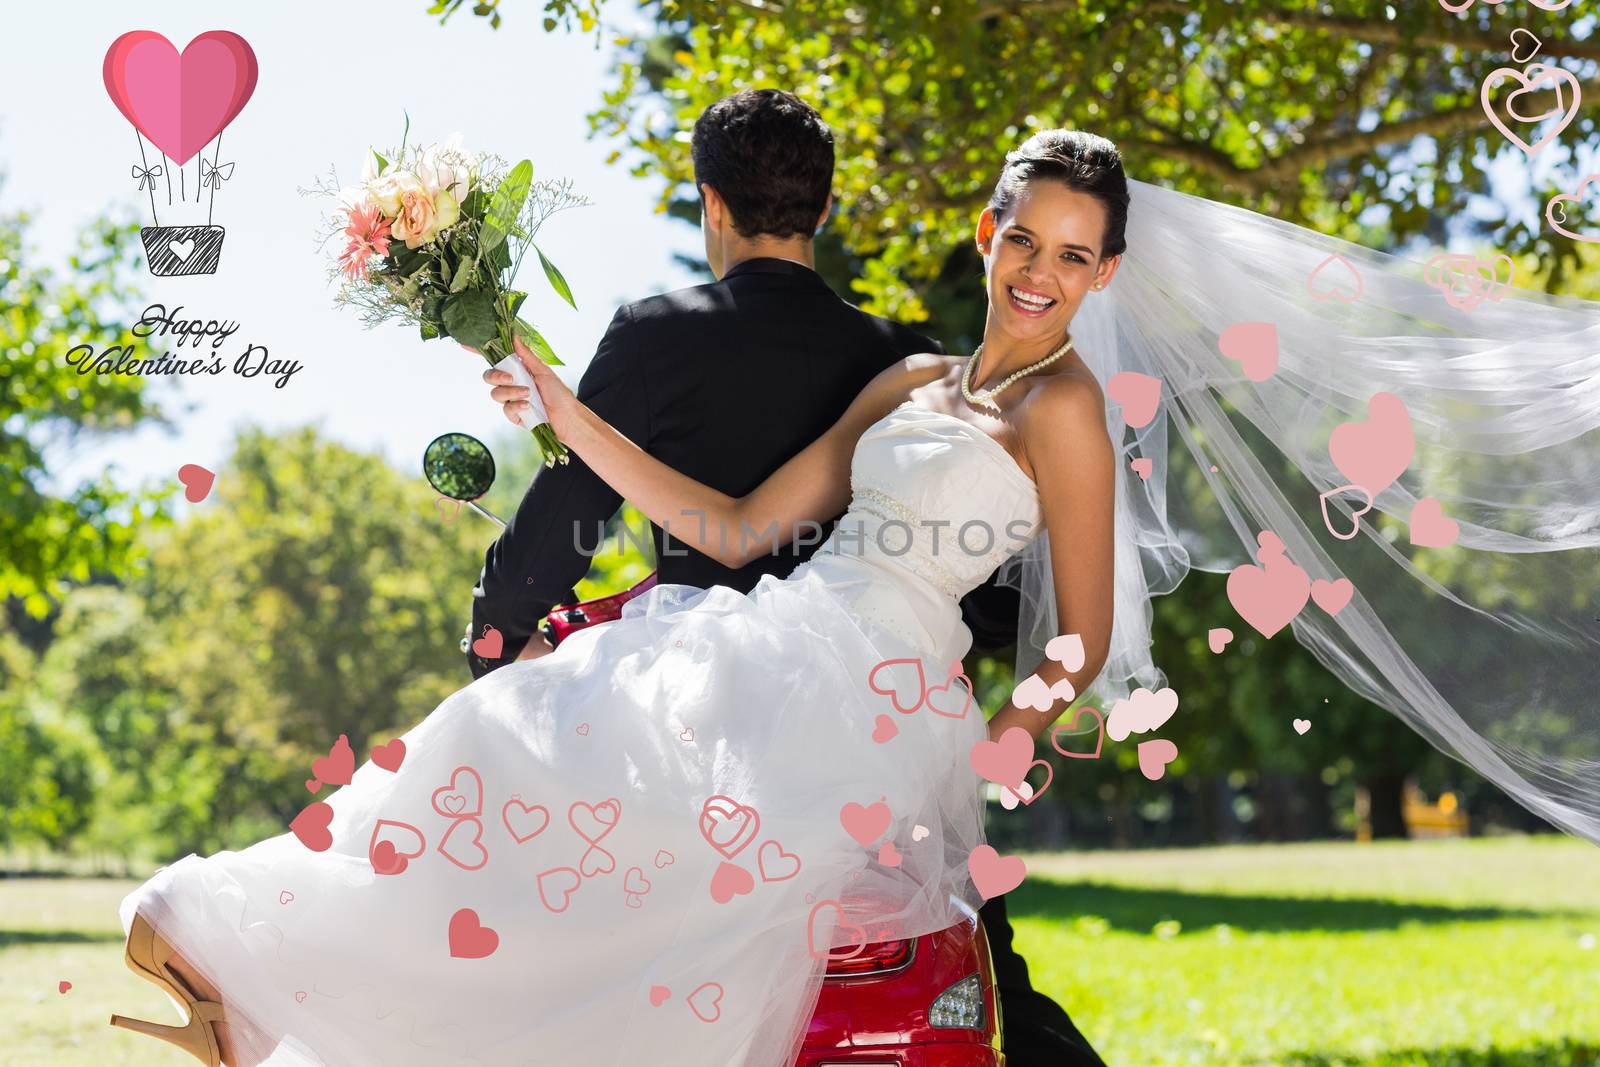 Newlywed couple sitting on scooter in park against cute valentines message